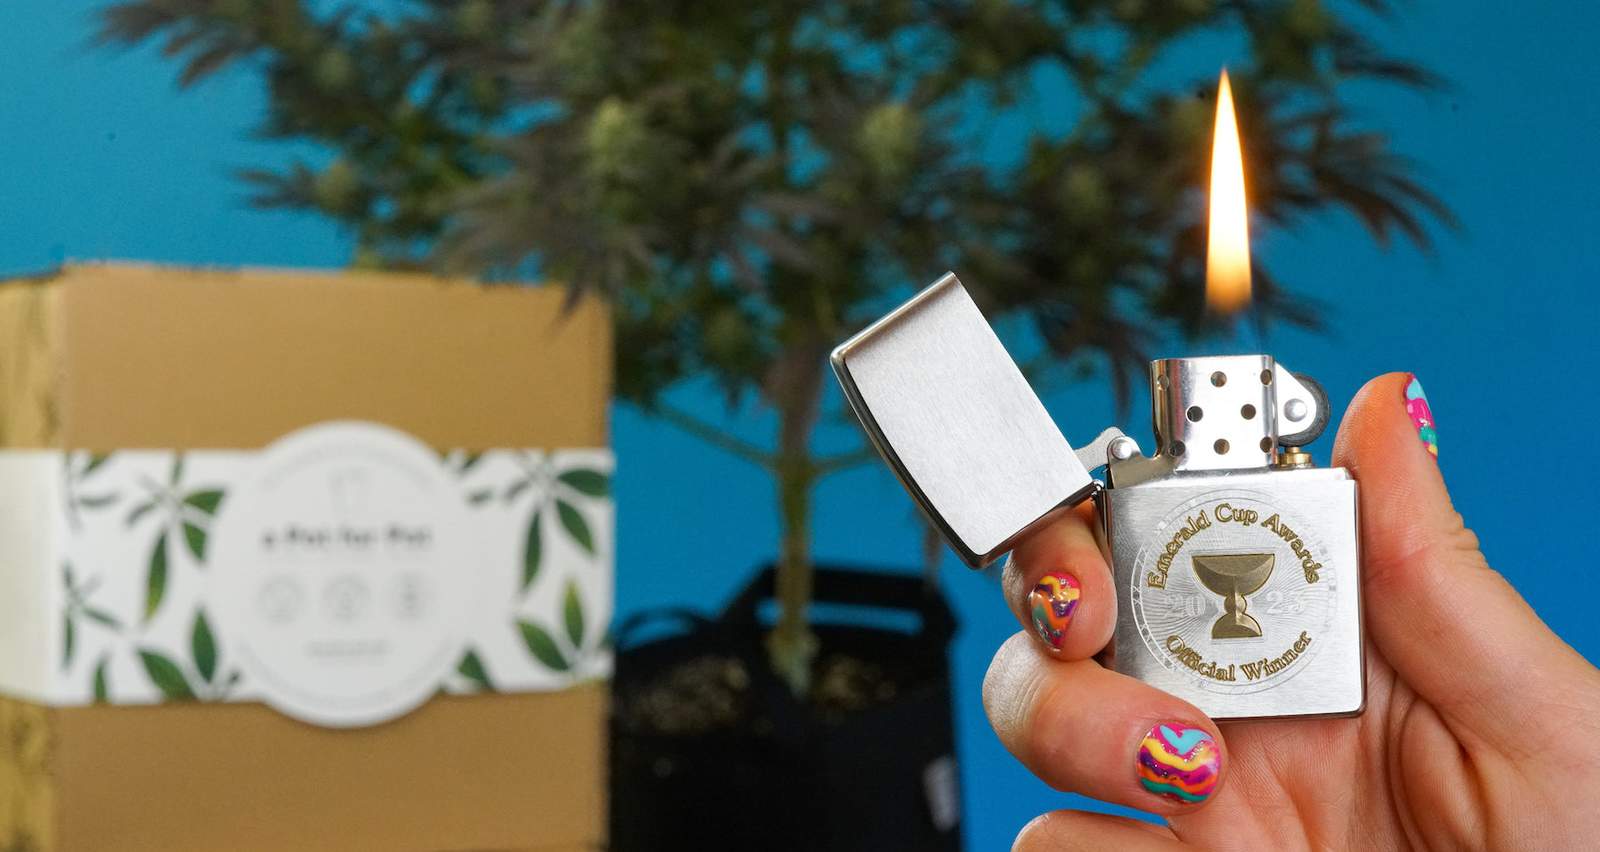 https://apotforpot.com/assets/ext/s/files/1/2426/5205/articles/opt/Emerald_Cup_2023_official_winner_zippo_lighter_in_front_of_first_place_winner_most_innovative_product_industry_asset_a_Pot_for_Pot_5_gallon_complete_kit_with_cannabis_plant.jpg